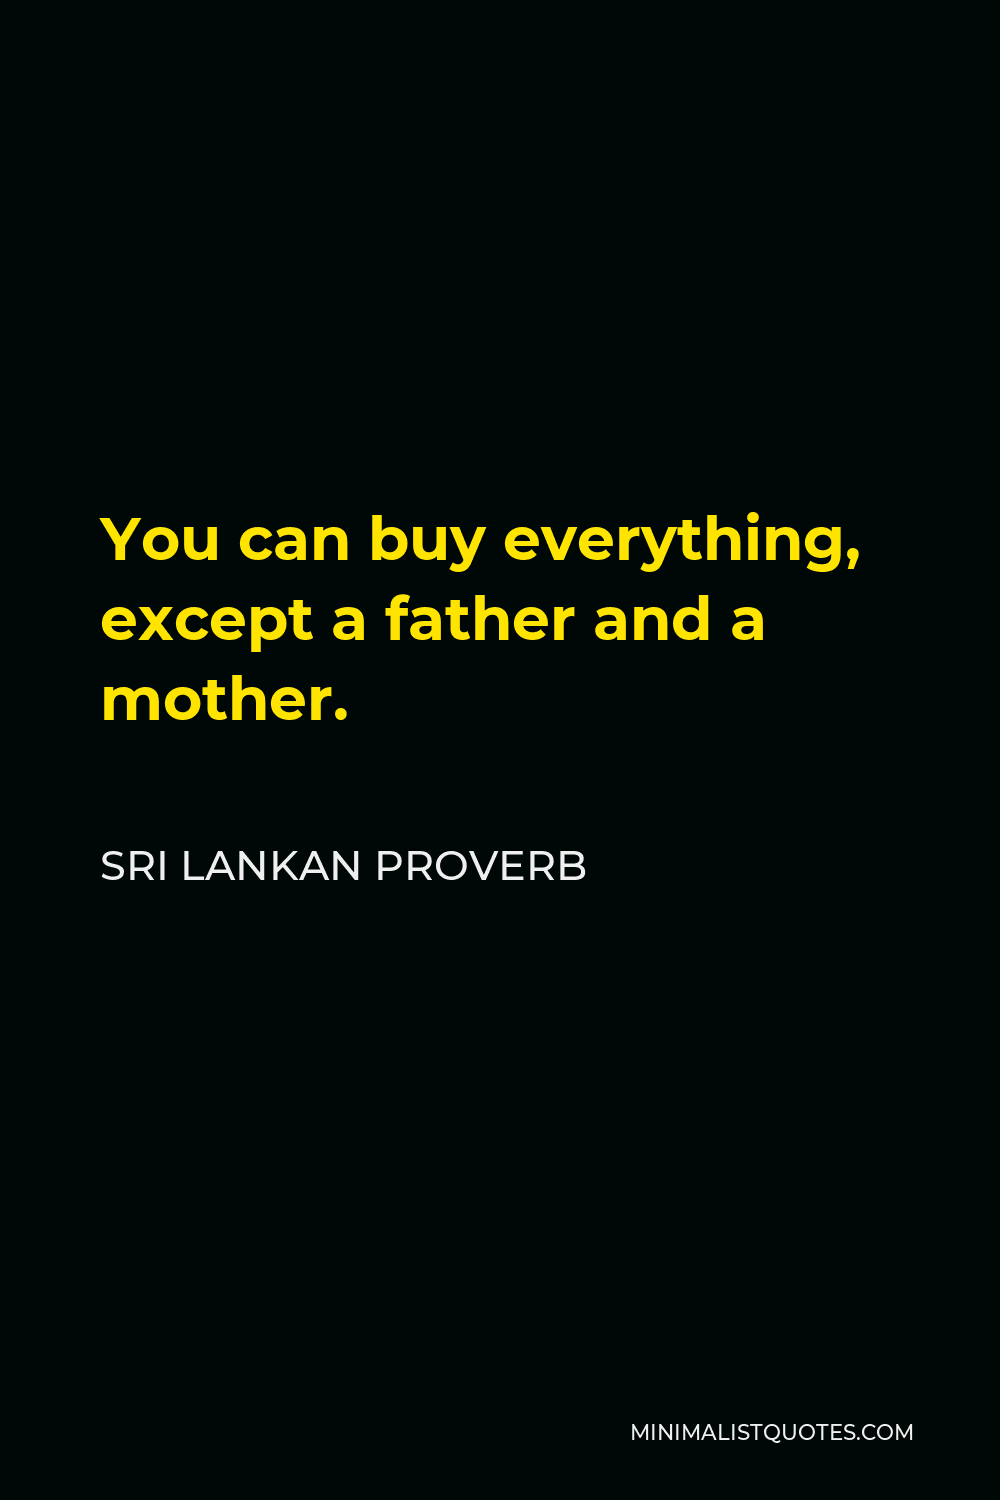 Sri Lankan Proverb Quote - You can buy everything, except a father and a mother.